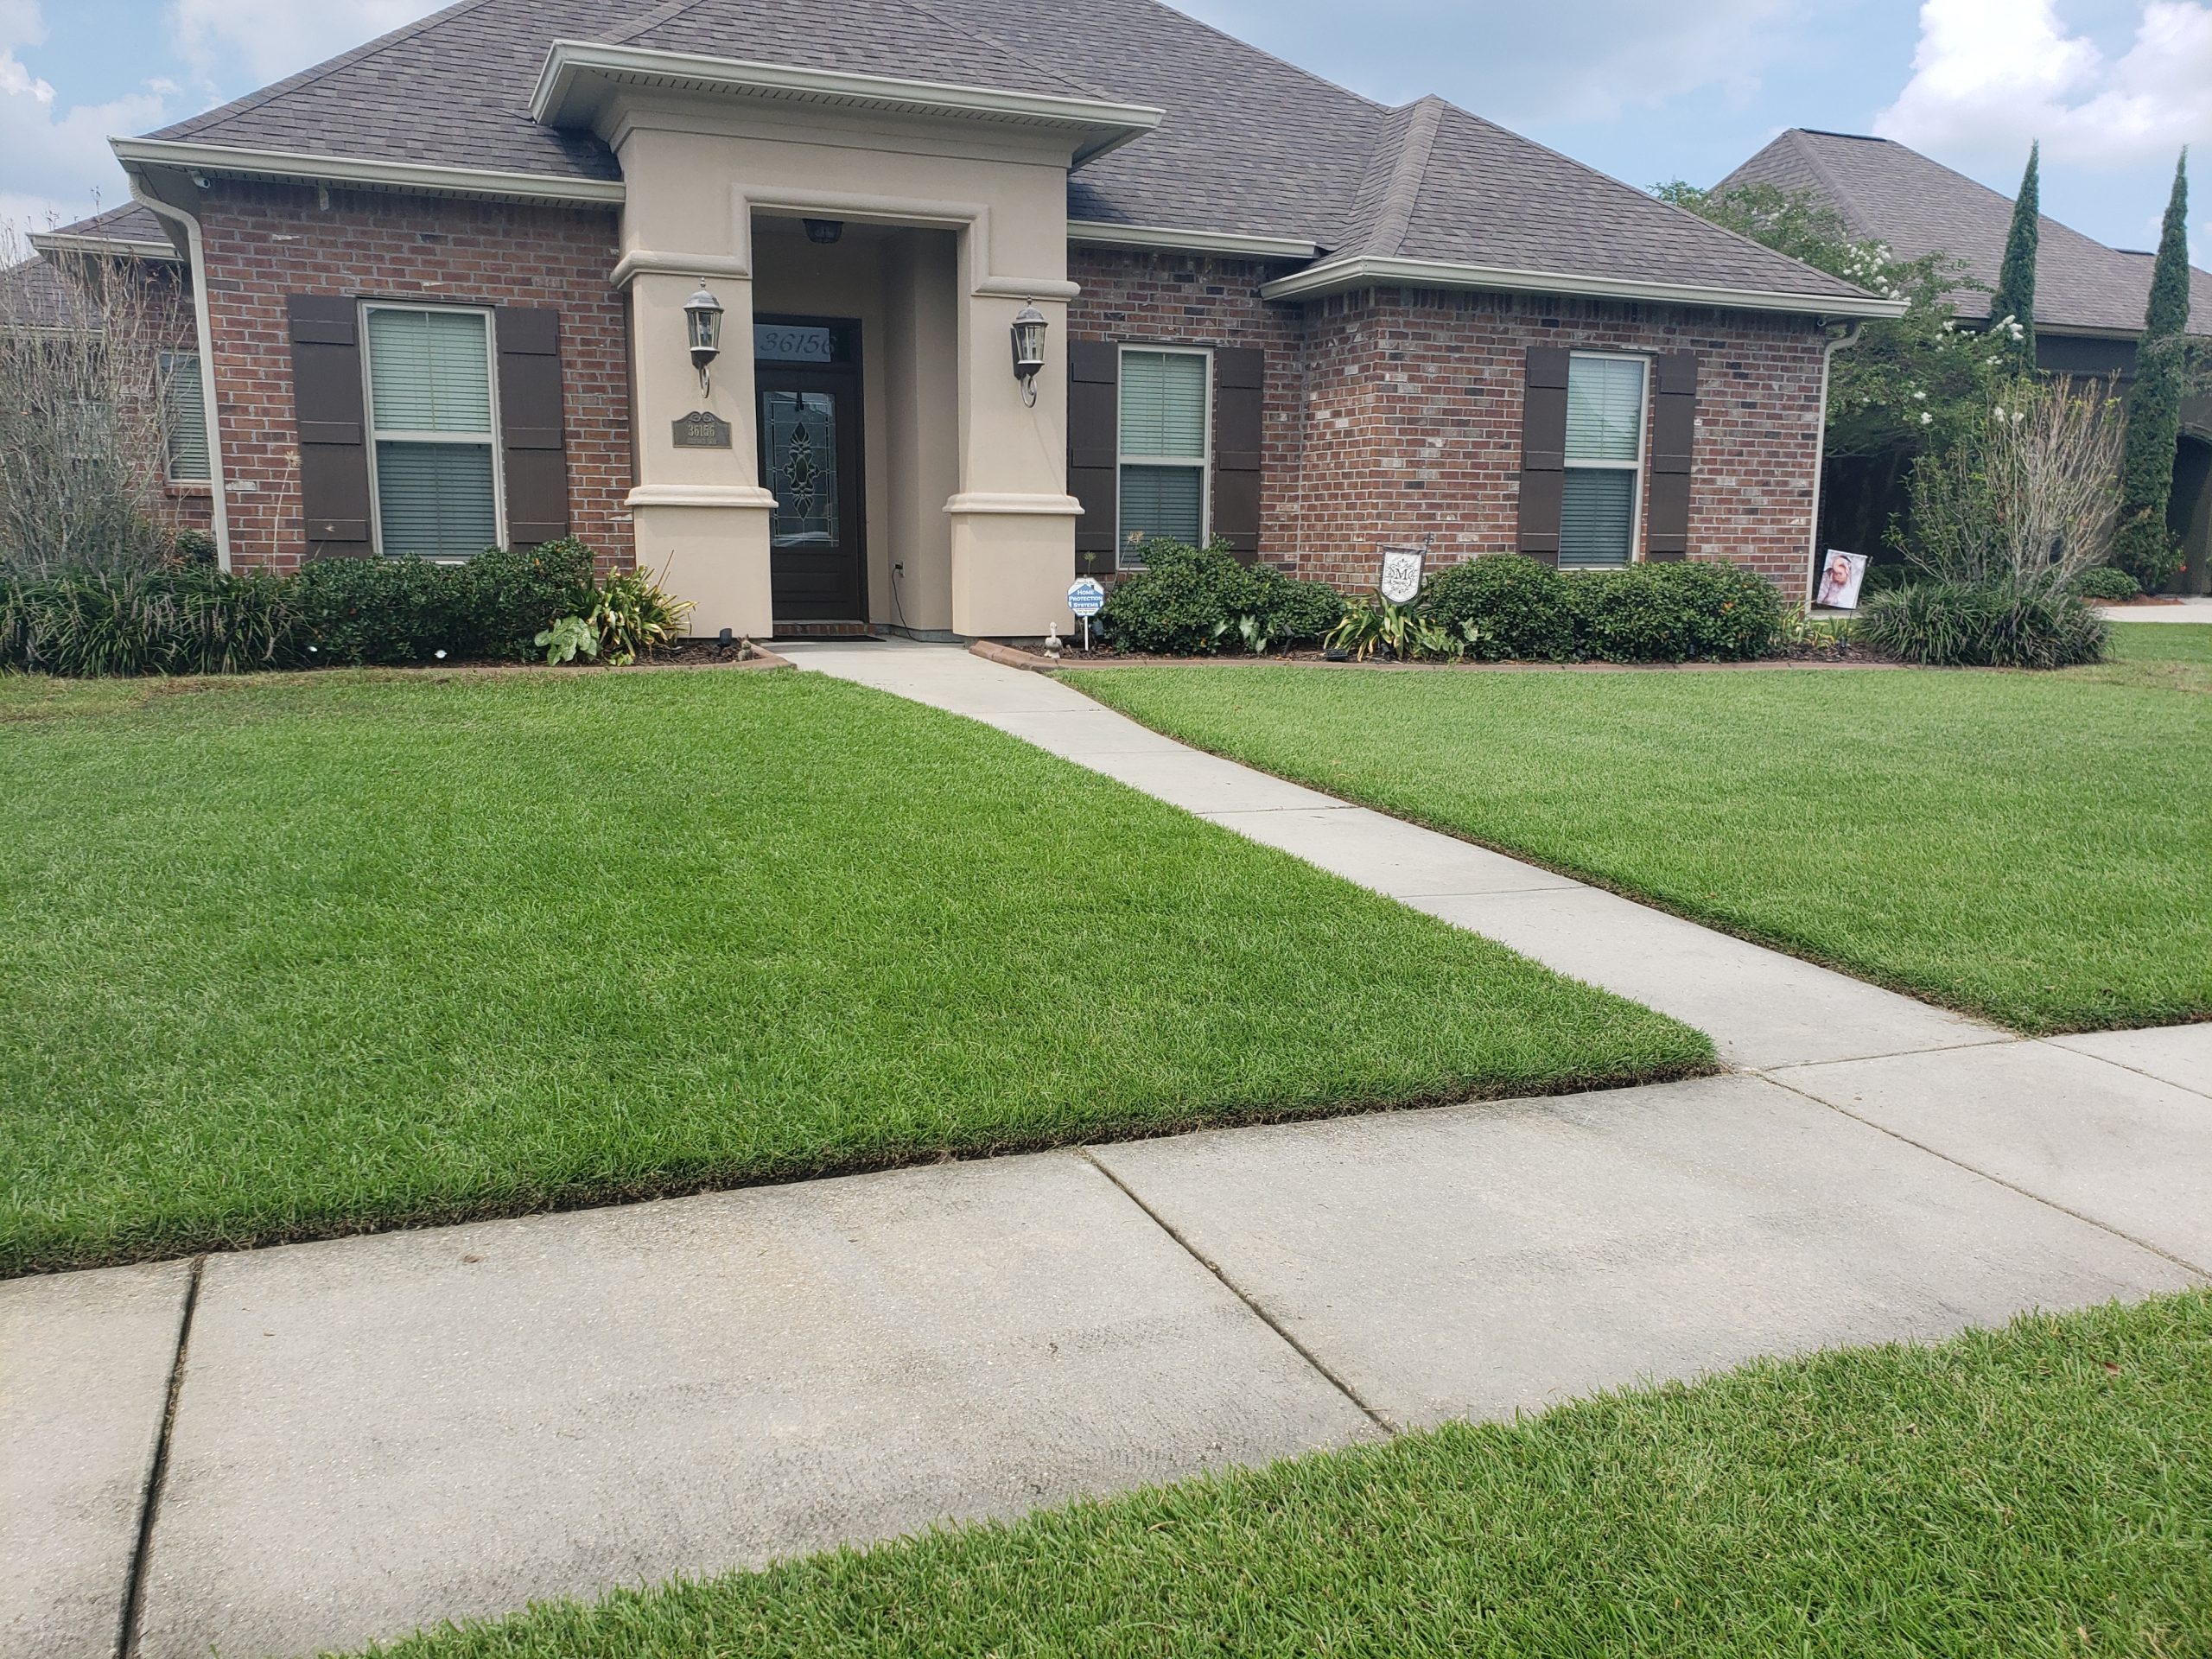 centipede grass sod for sale, delivery, and installation in baton rouge, denham springs, prairieville, zachary, gonzales, central louisiana